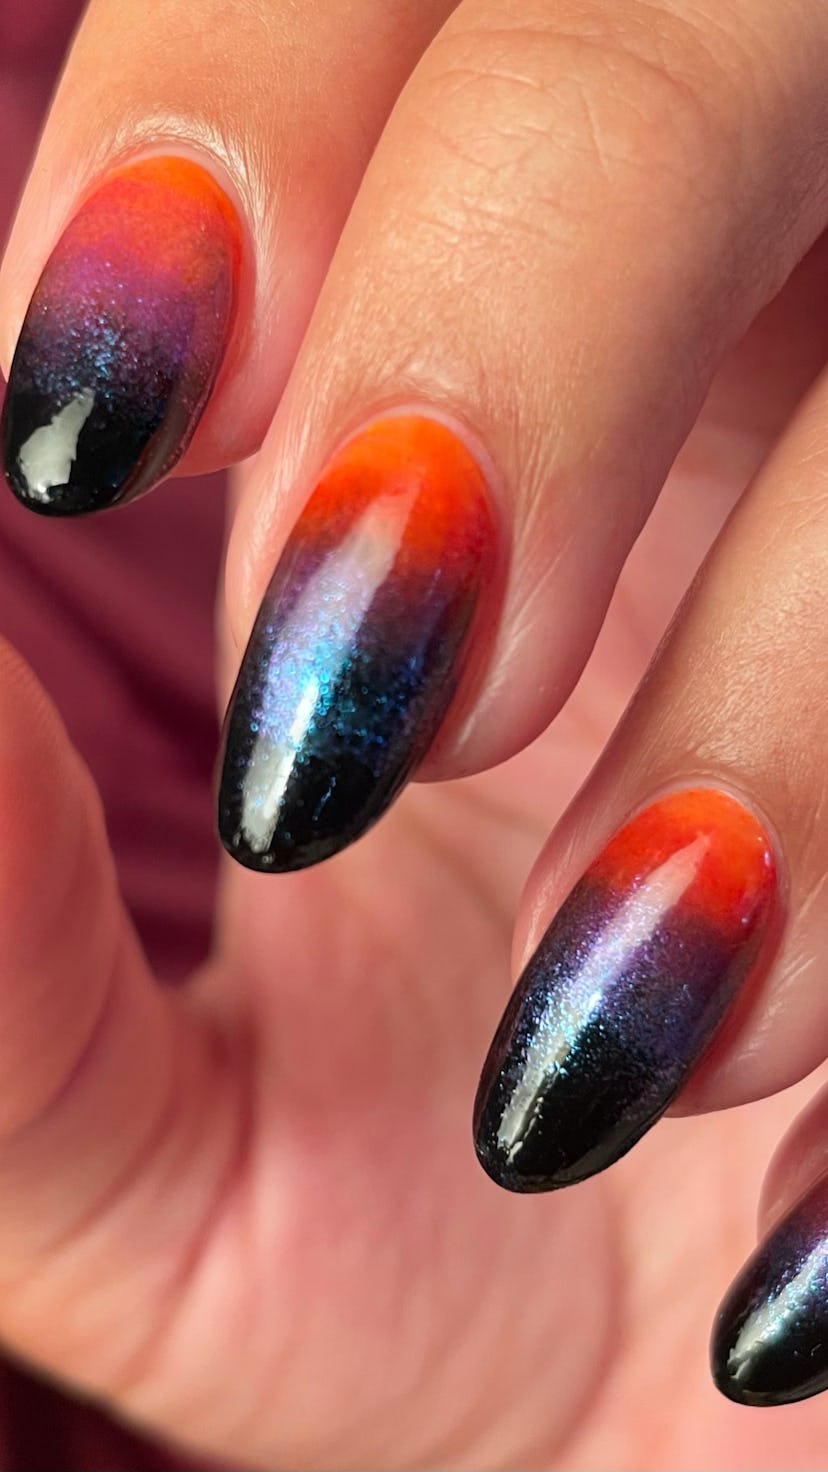 From candy corn to ghosts to spider webs, these spooky manicures are here if you need design ideas f...